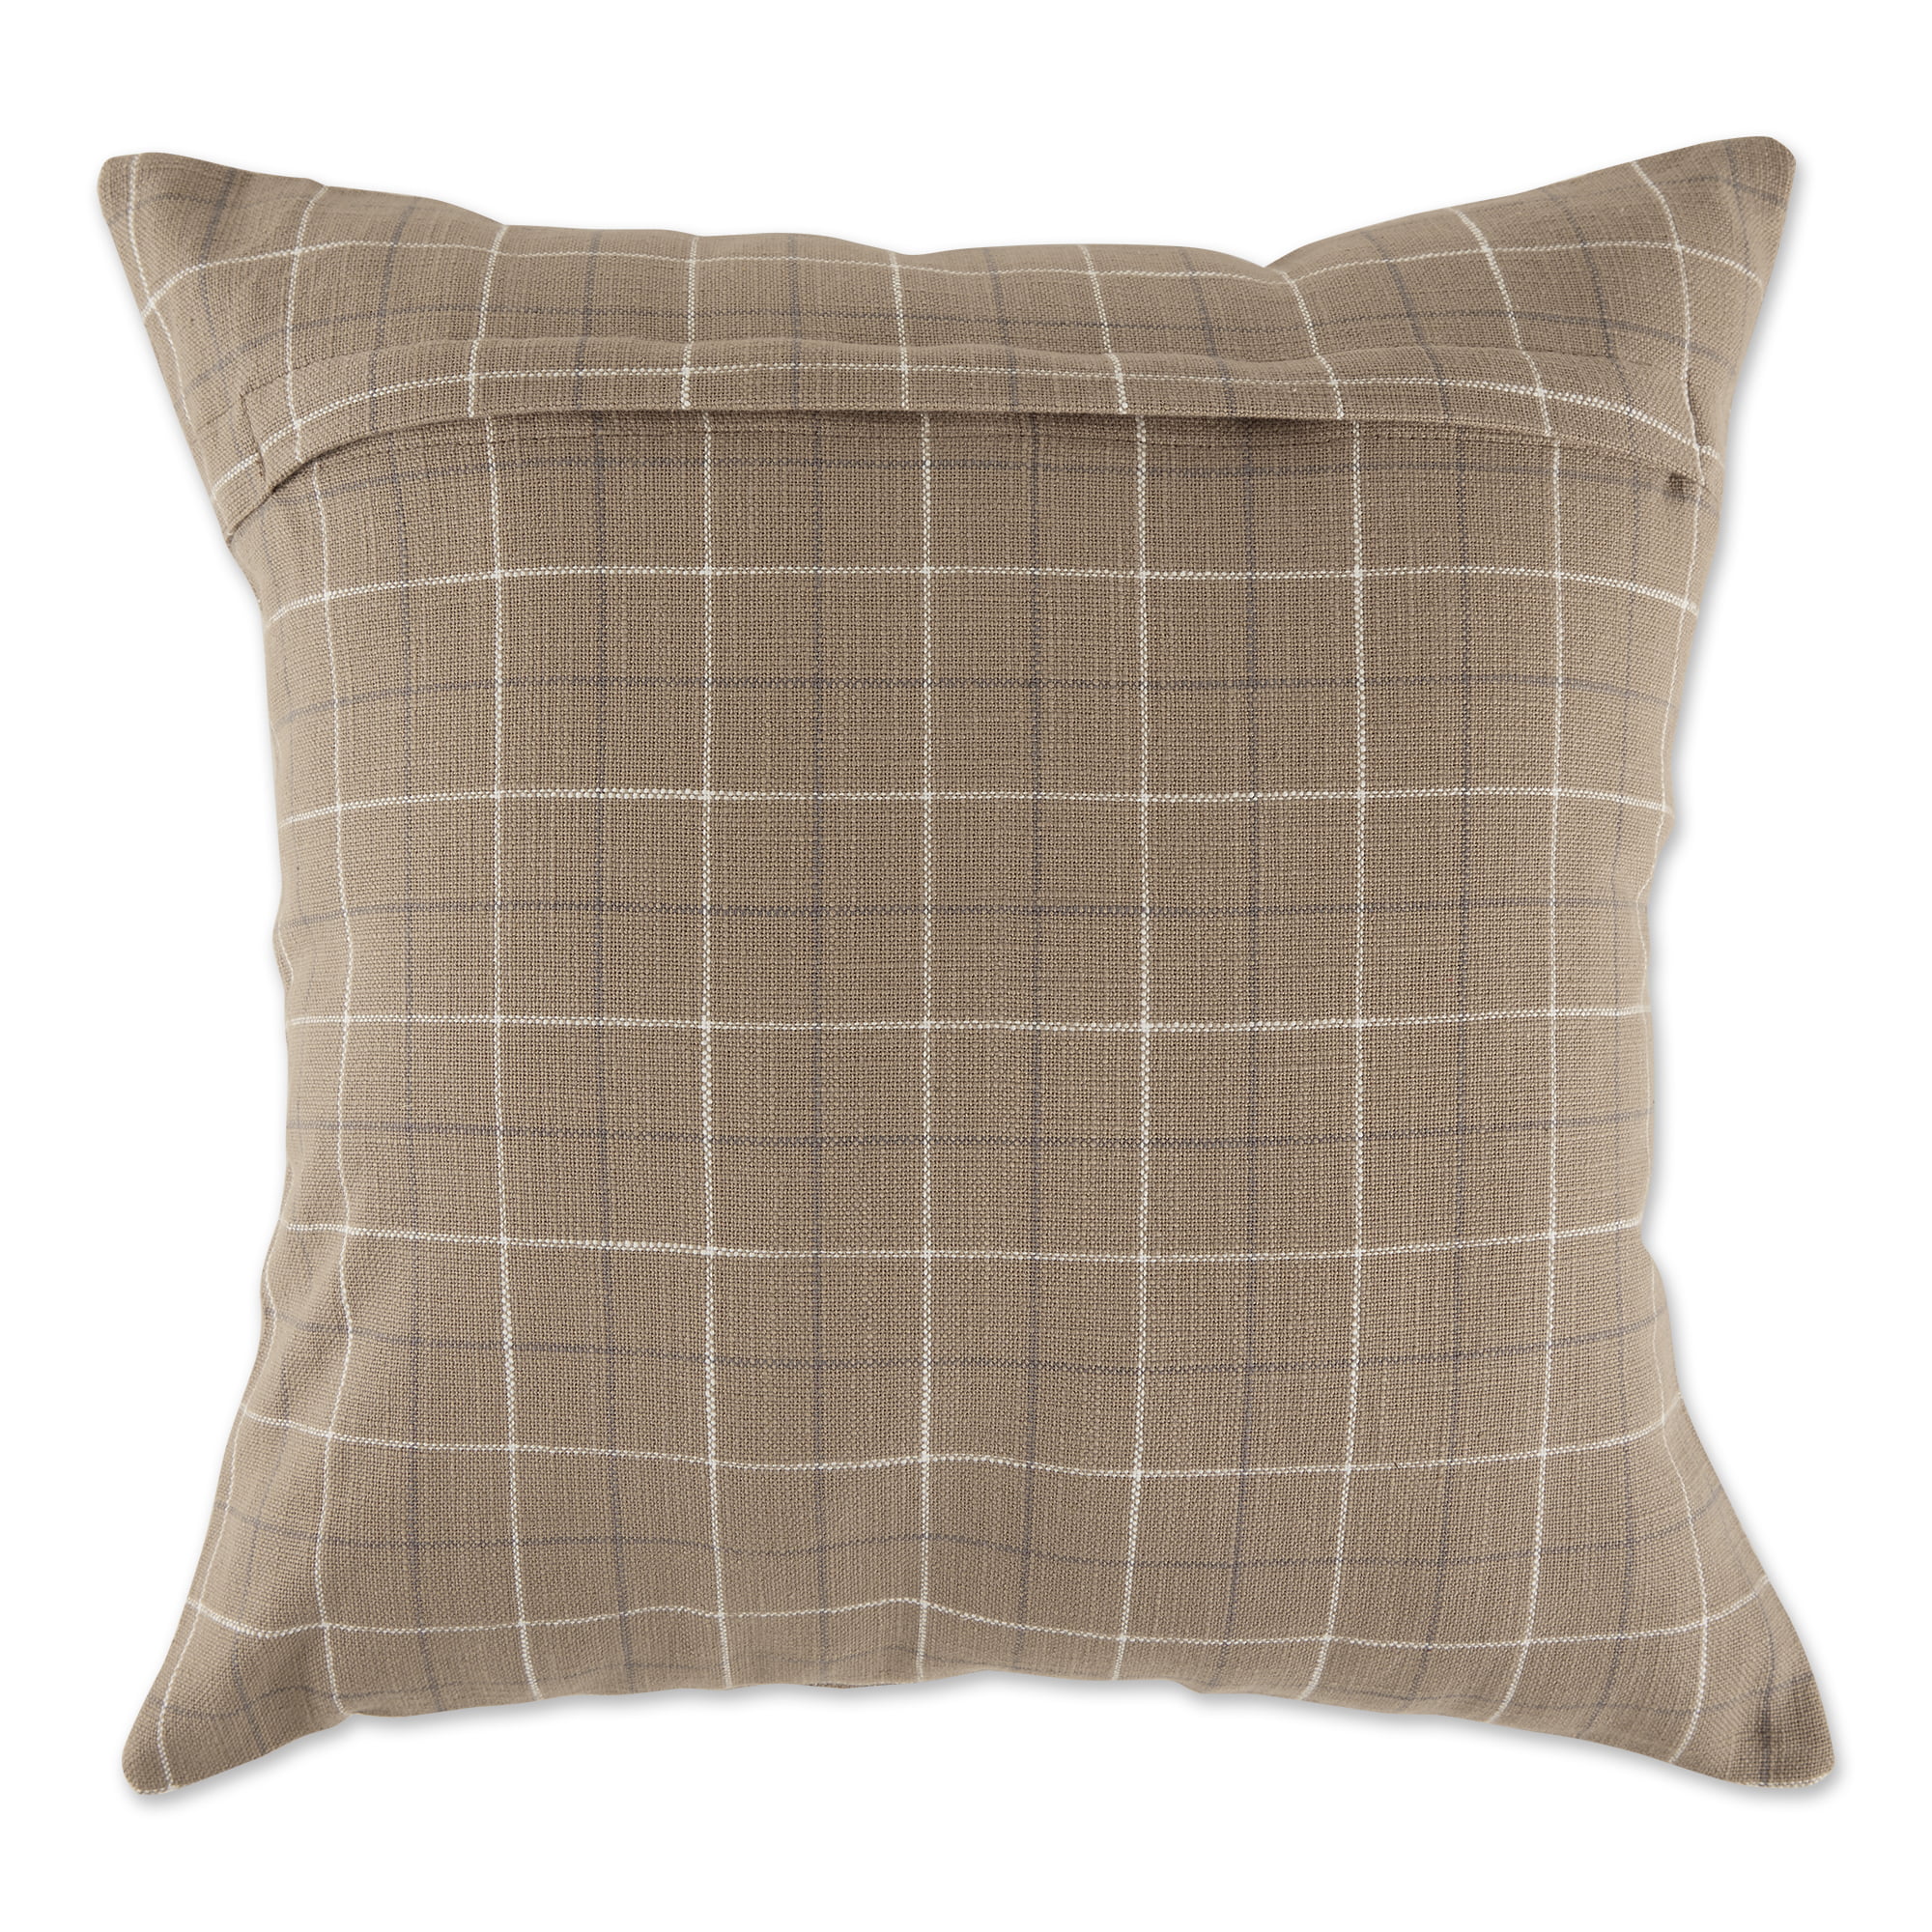 Design Imports Checkered Pillow Covers 18x18 Set of 4 - 20155331